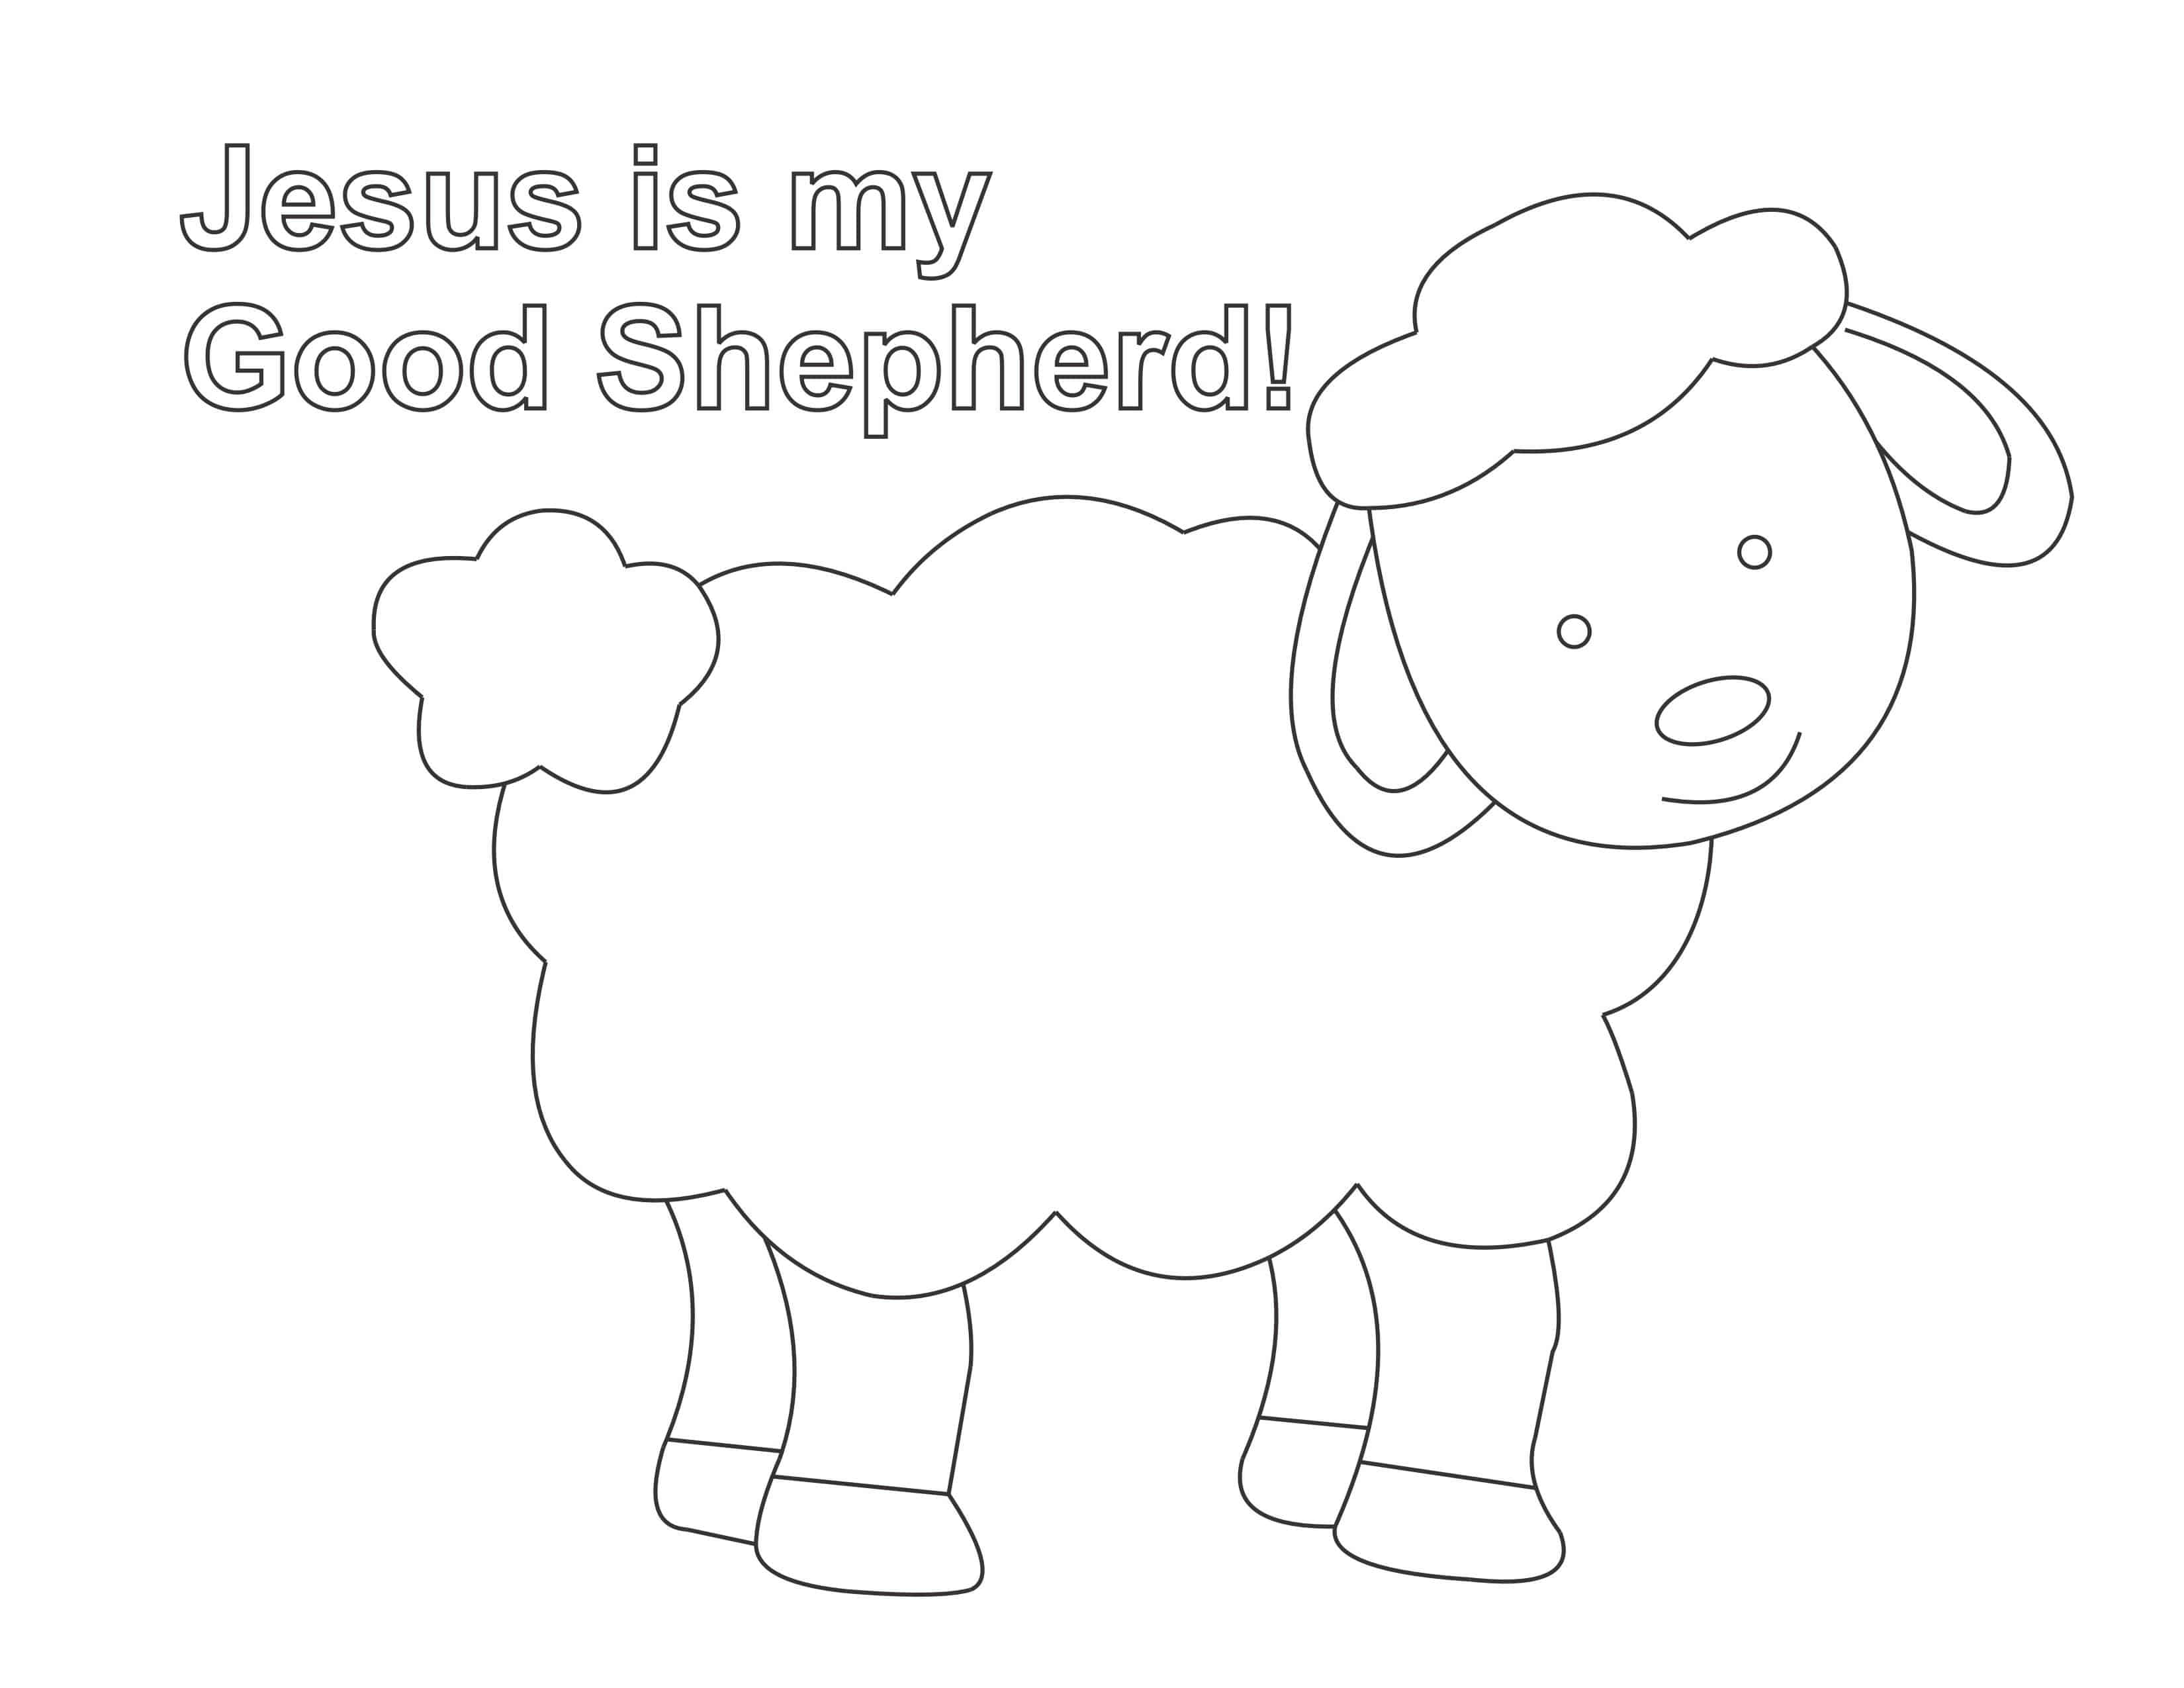 The Good Shepherd Coloring Page Jesus Is The Good Shepherd Coloring Page Easy Print 100 Free